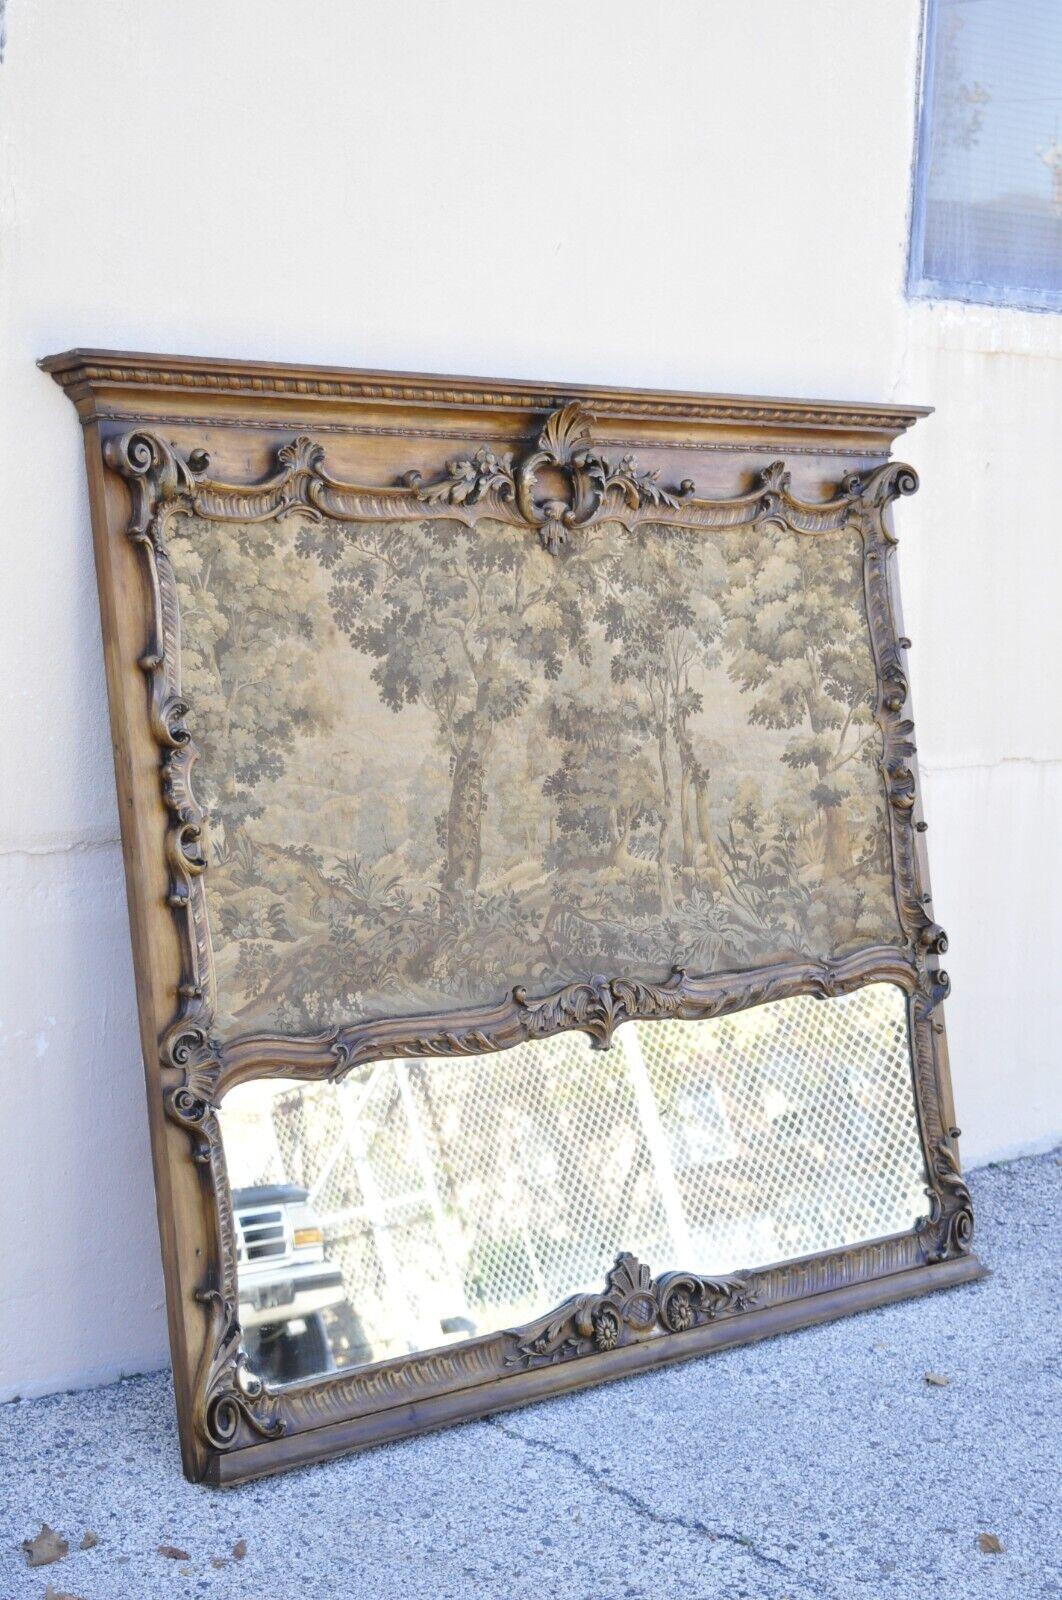 Antique French Louis XV Style Large Overmantle Trumeau Mirror with Tapestry. Item features a large impressive size, relief carved frame, French tapestry to upper, lower central mirror, very nice antique item, quality French craftsmanship, great